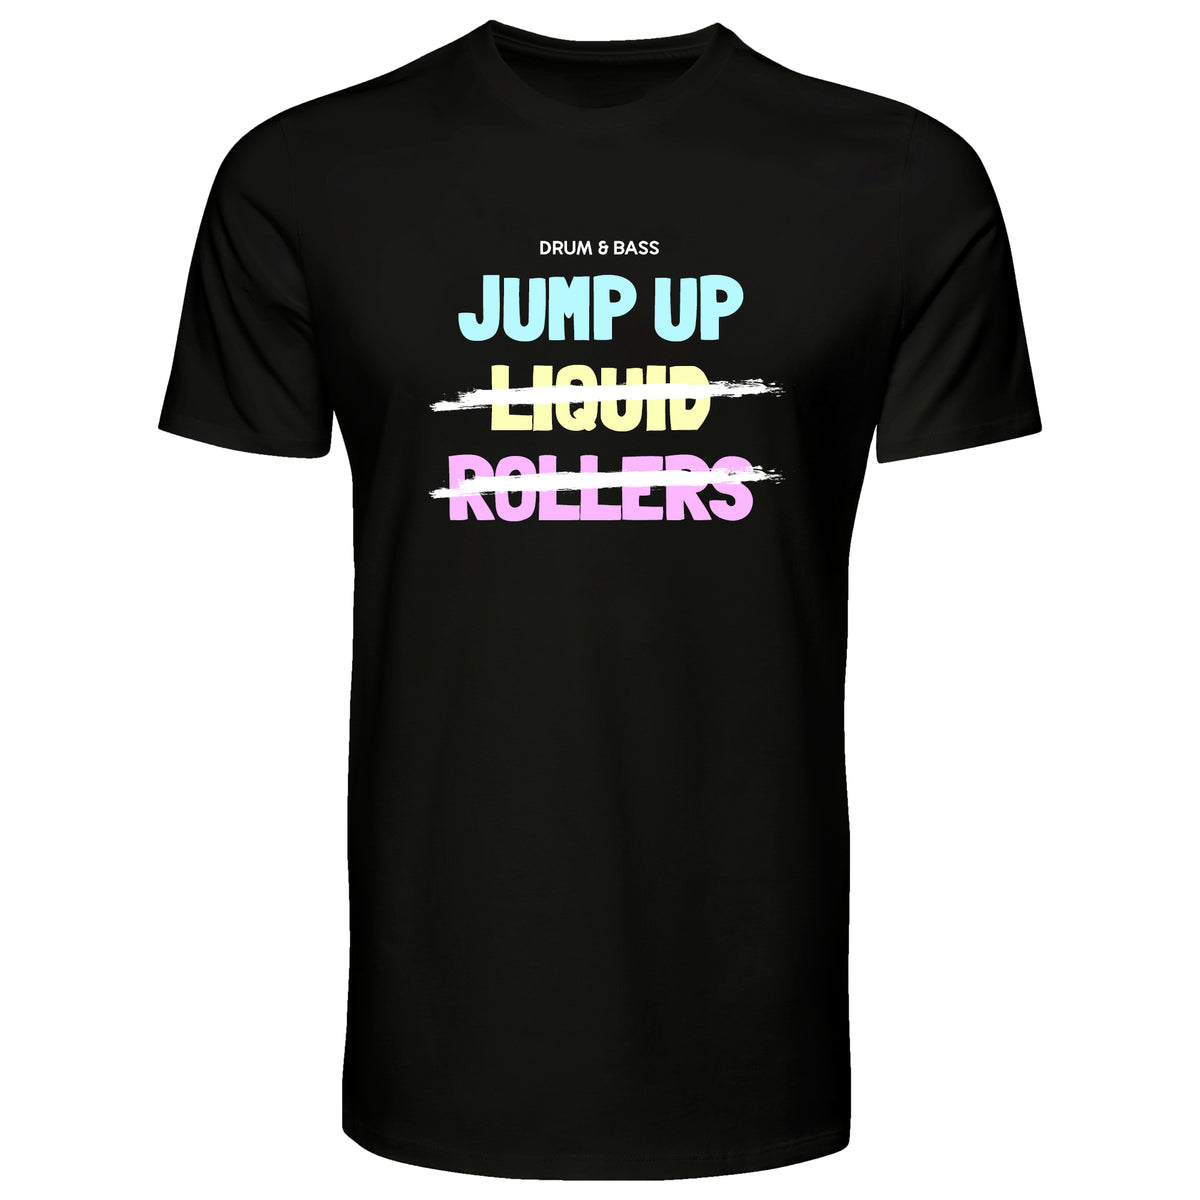 Whats Your Style Tee (Jump Up)